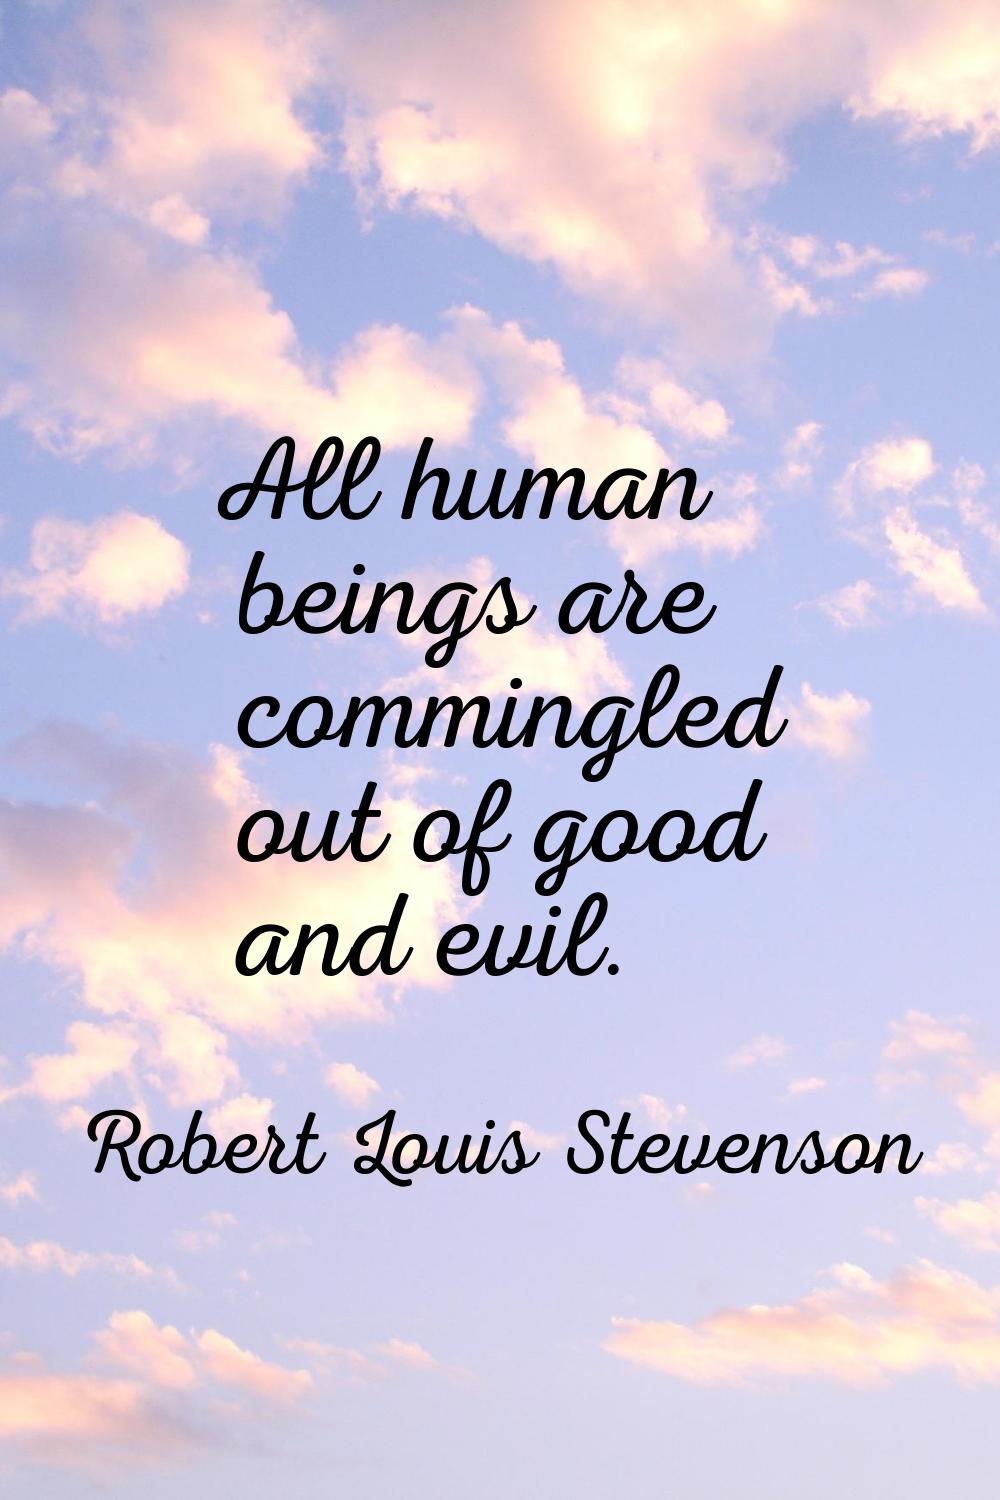 All human beings are commingled out of good and evil.